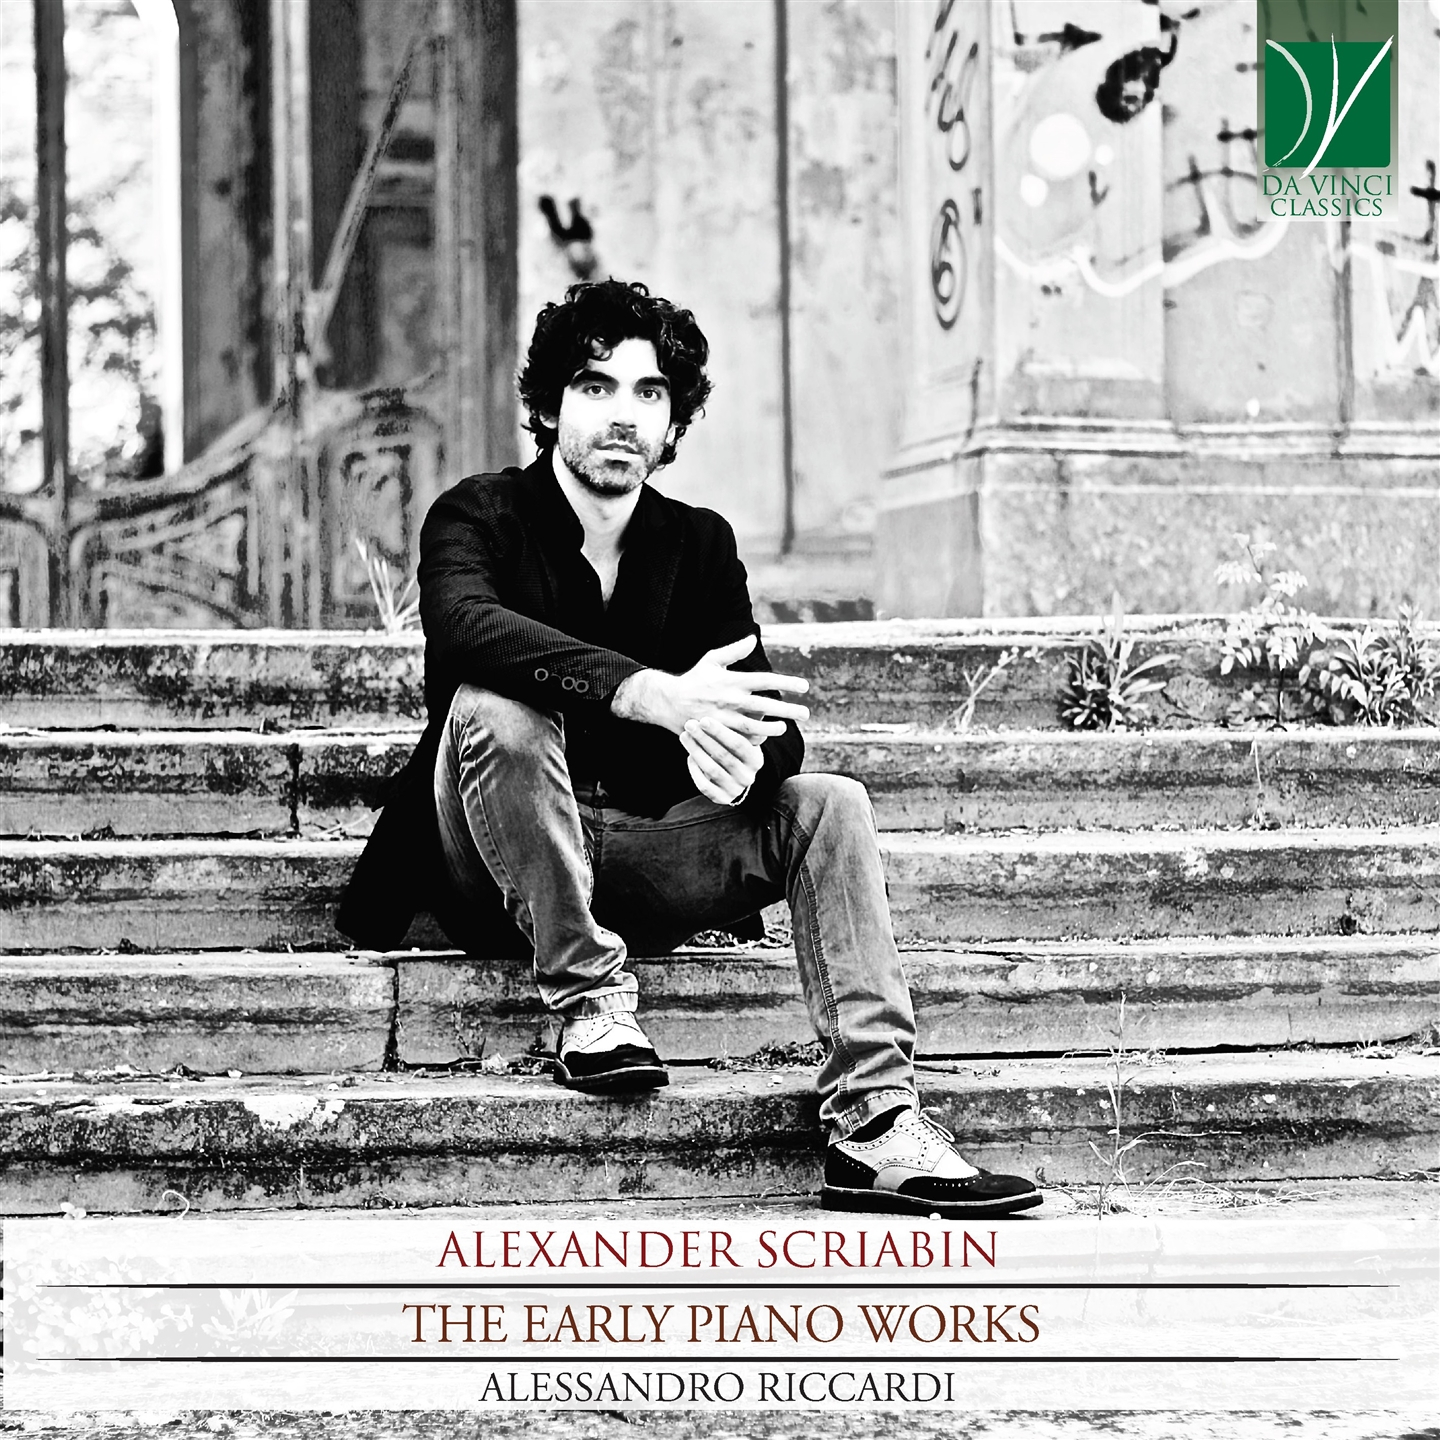 SCRIABIN: THE EARLY PIANO WORKS